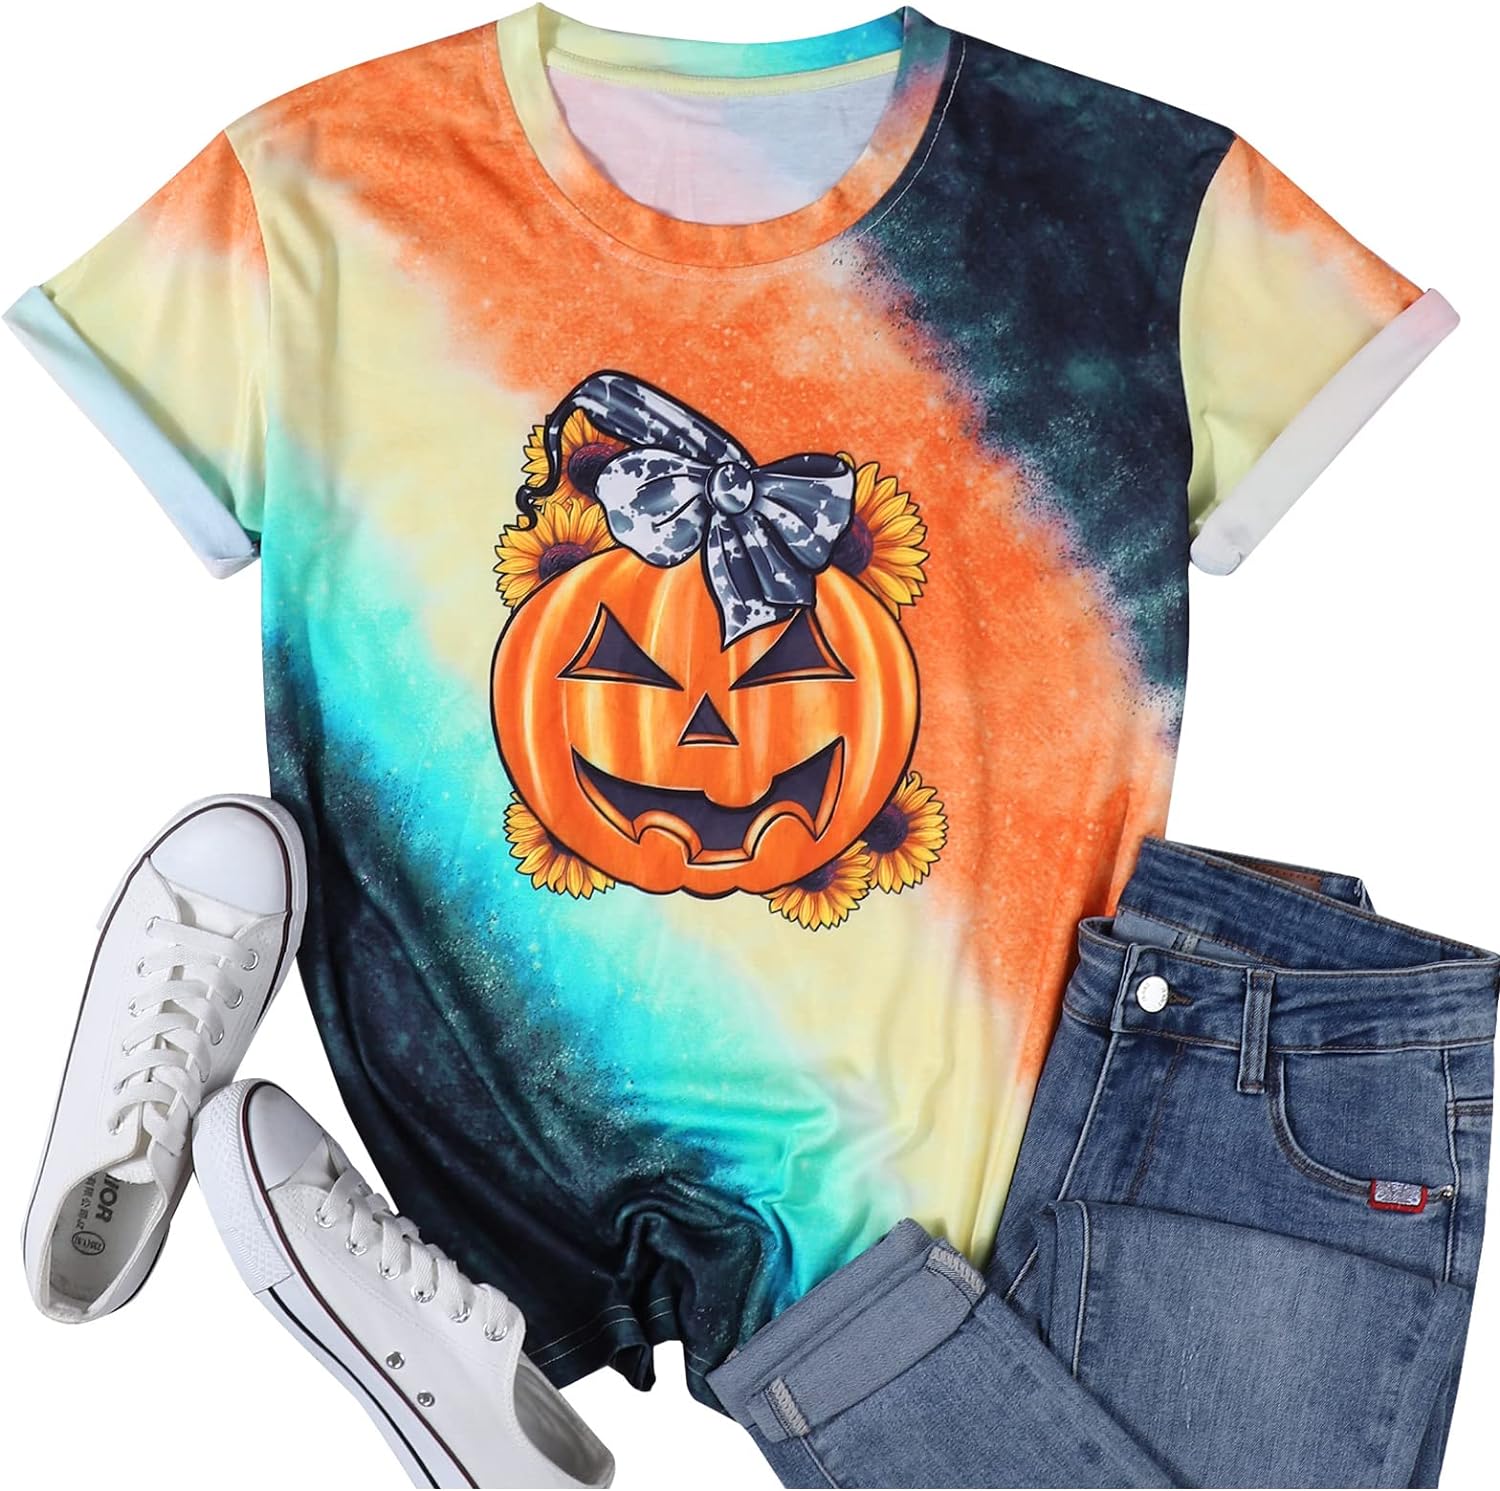 ALLTB Halloween Shirts for Women Pumpkin Novelty Graphic T-Shirts Party Casual V Neck Long Sleeve Tops